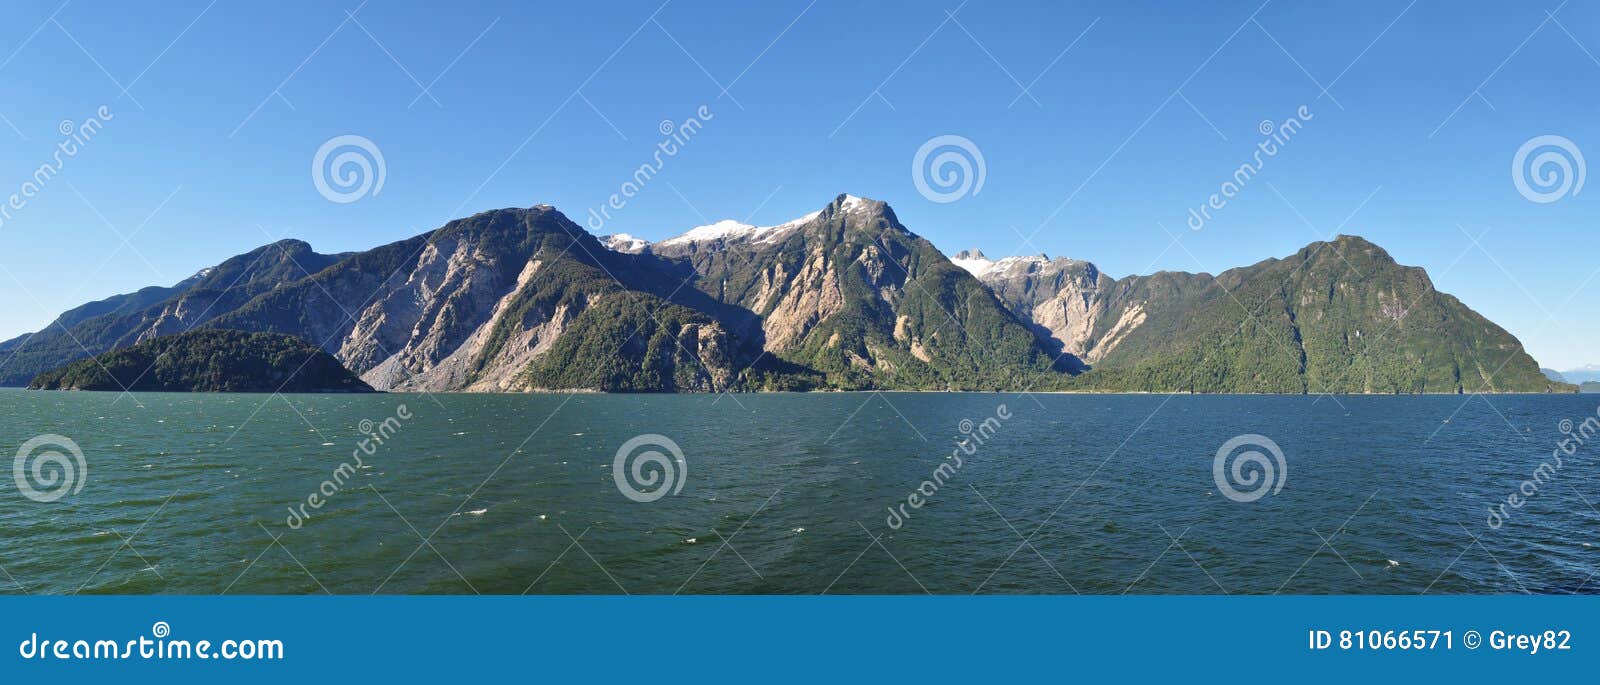 aysen fjord and puerto chacabuco surrounding area, patagonia, chile, south america